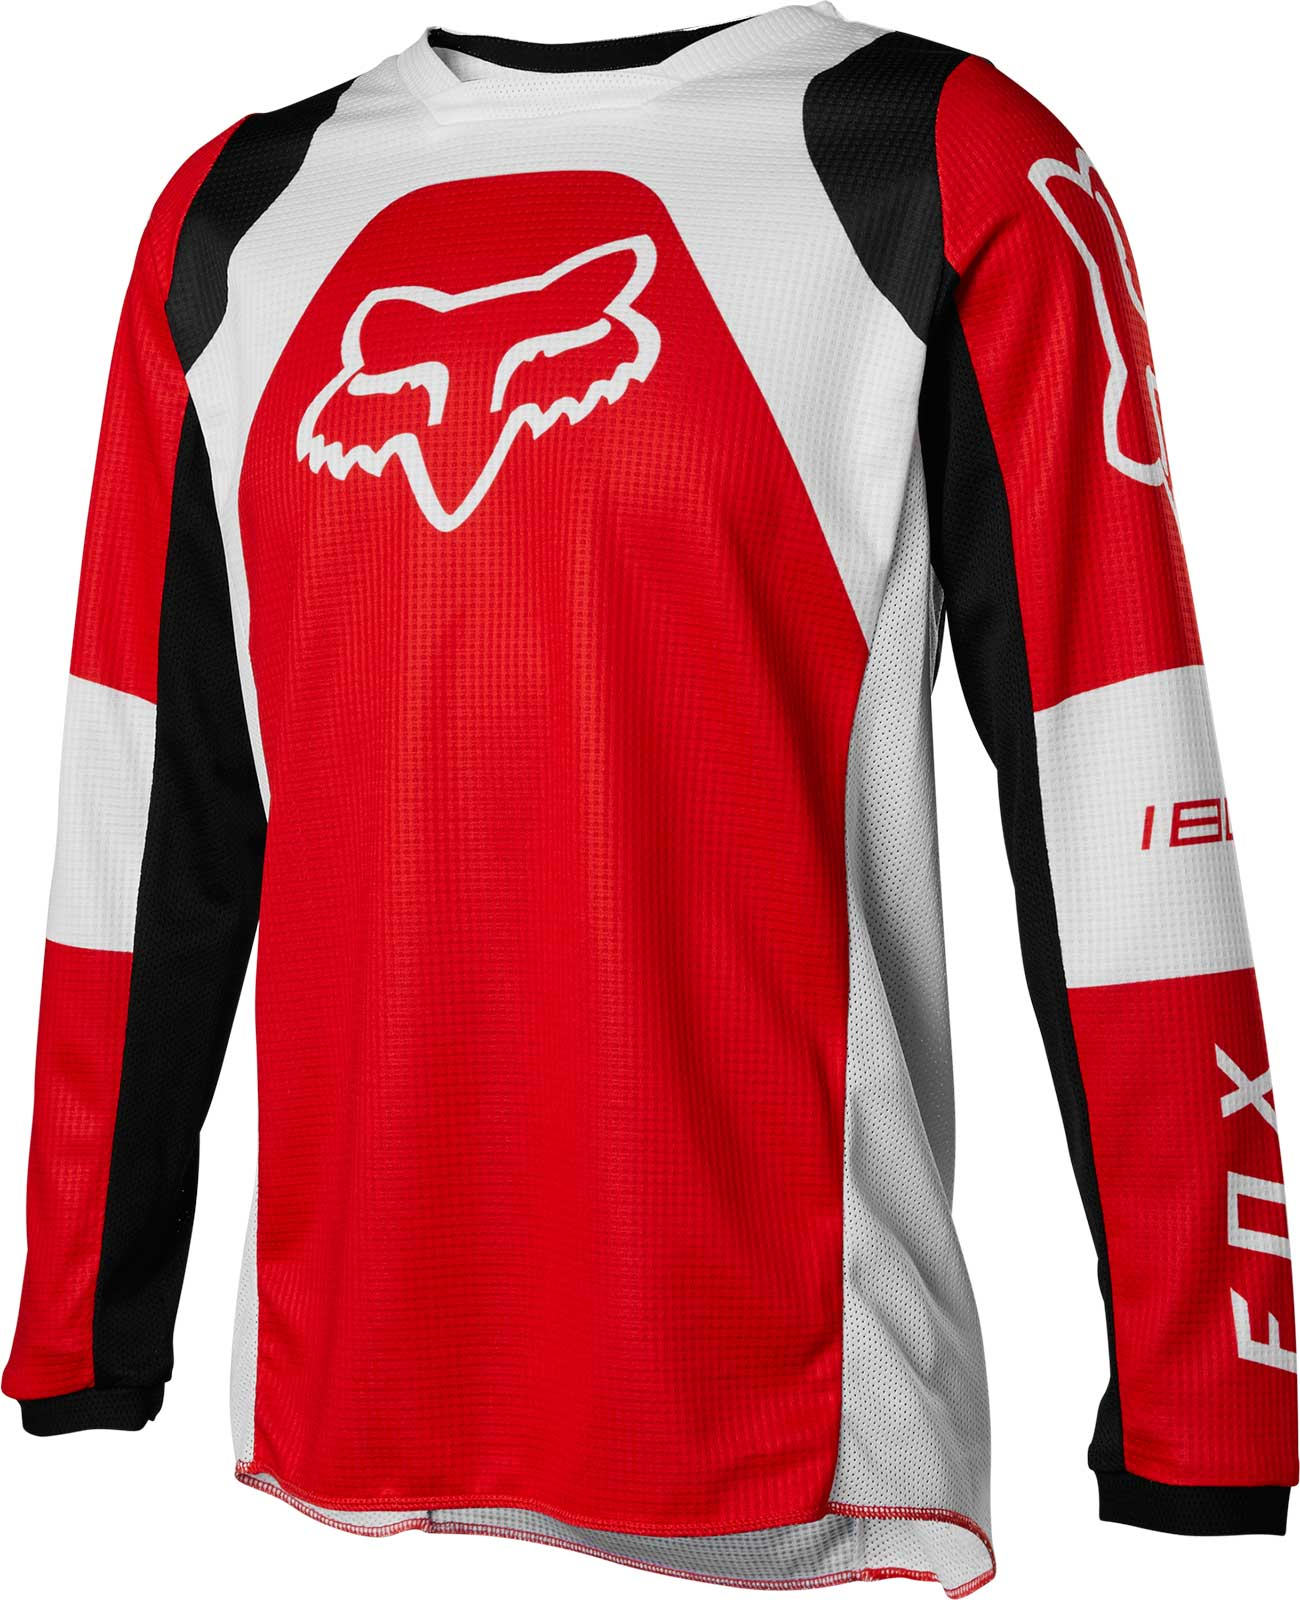 Fox Racing 180 Lux Youth Off-Road Motorcycle Jersey 